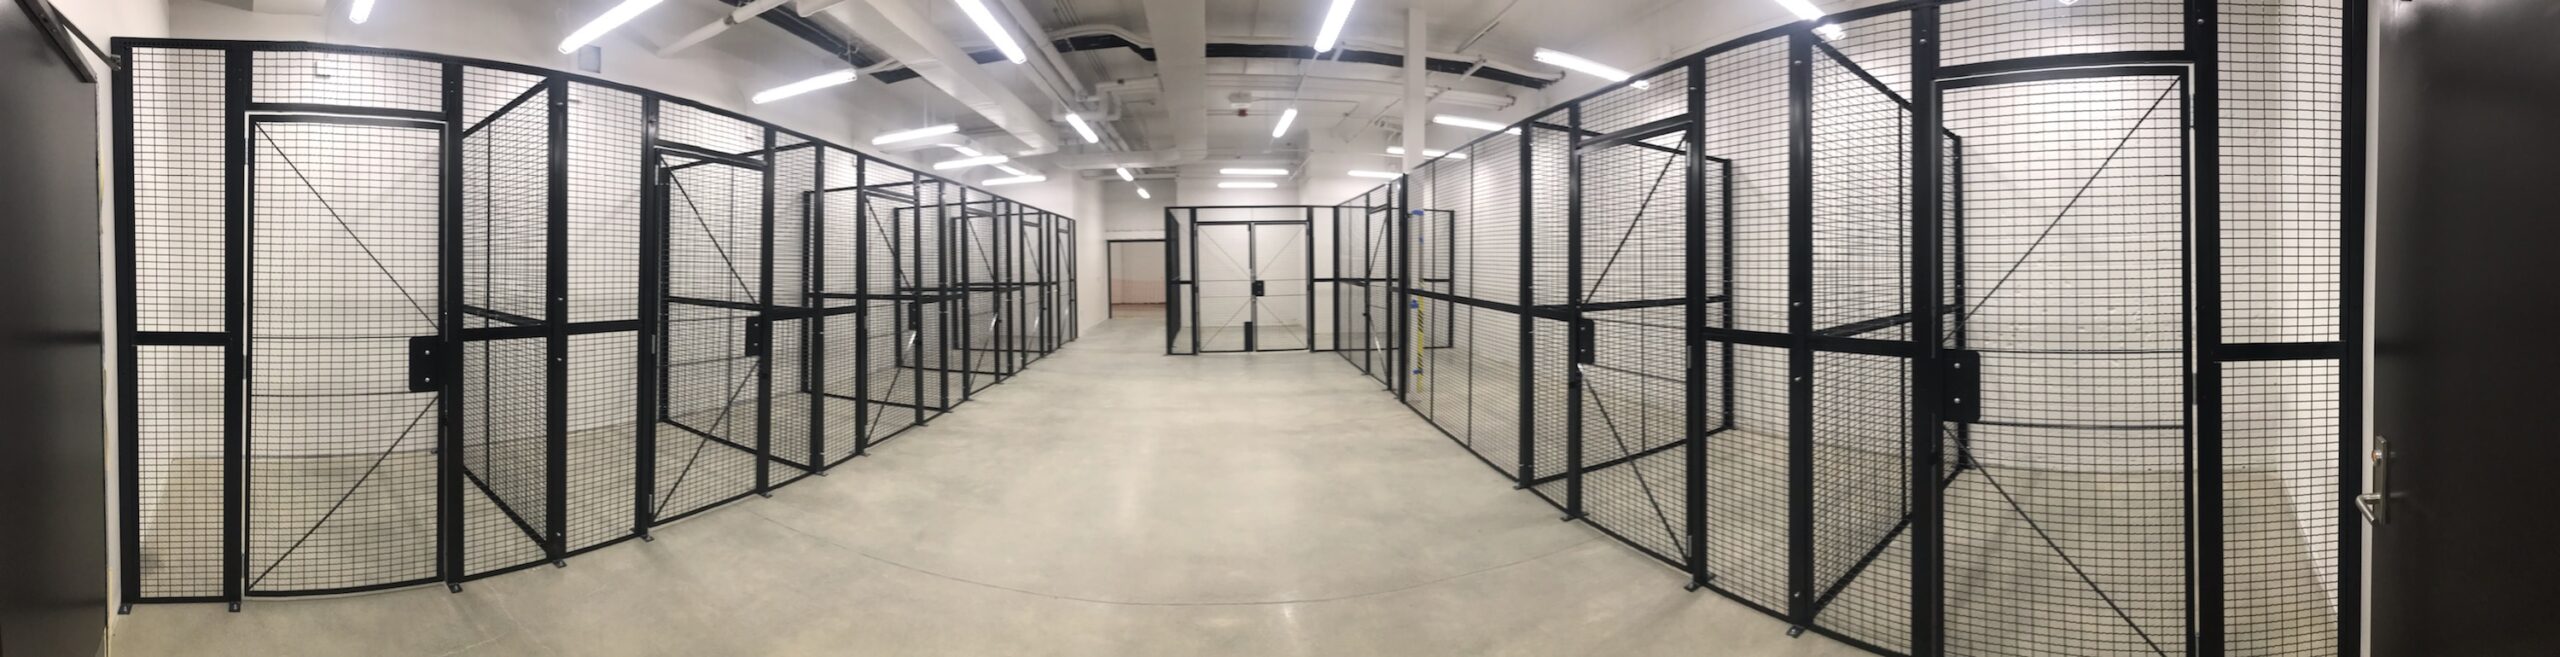 Athletic Storage Cages